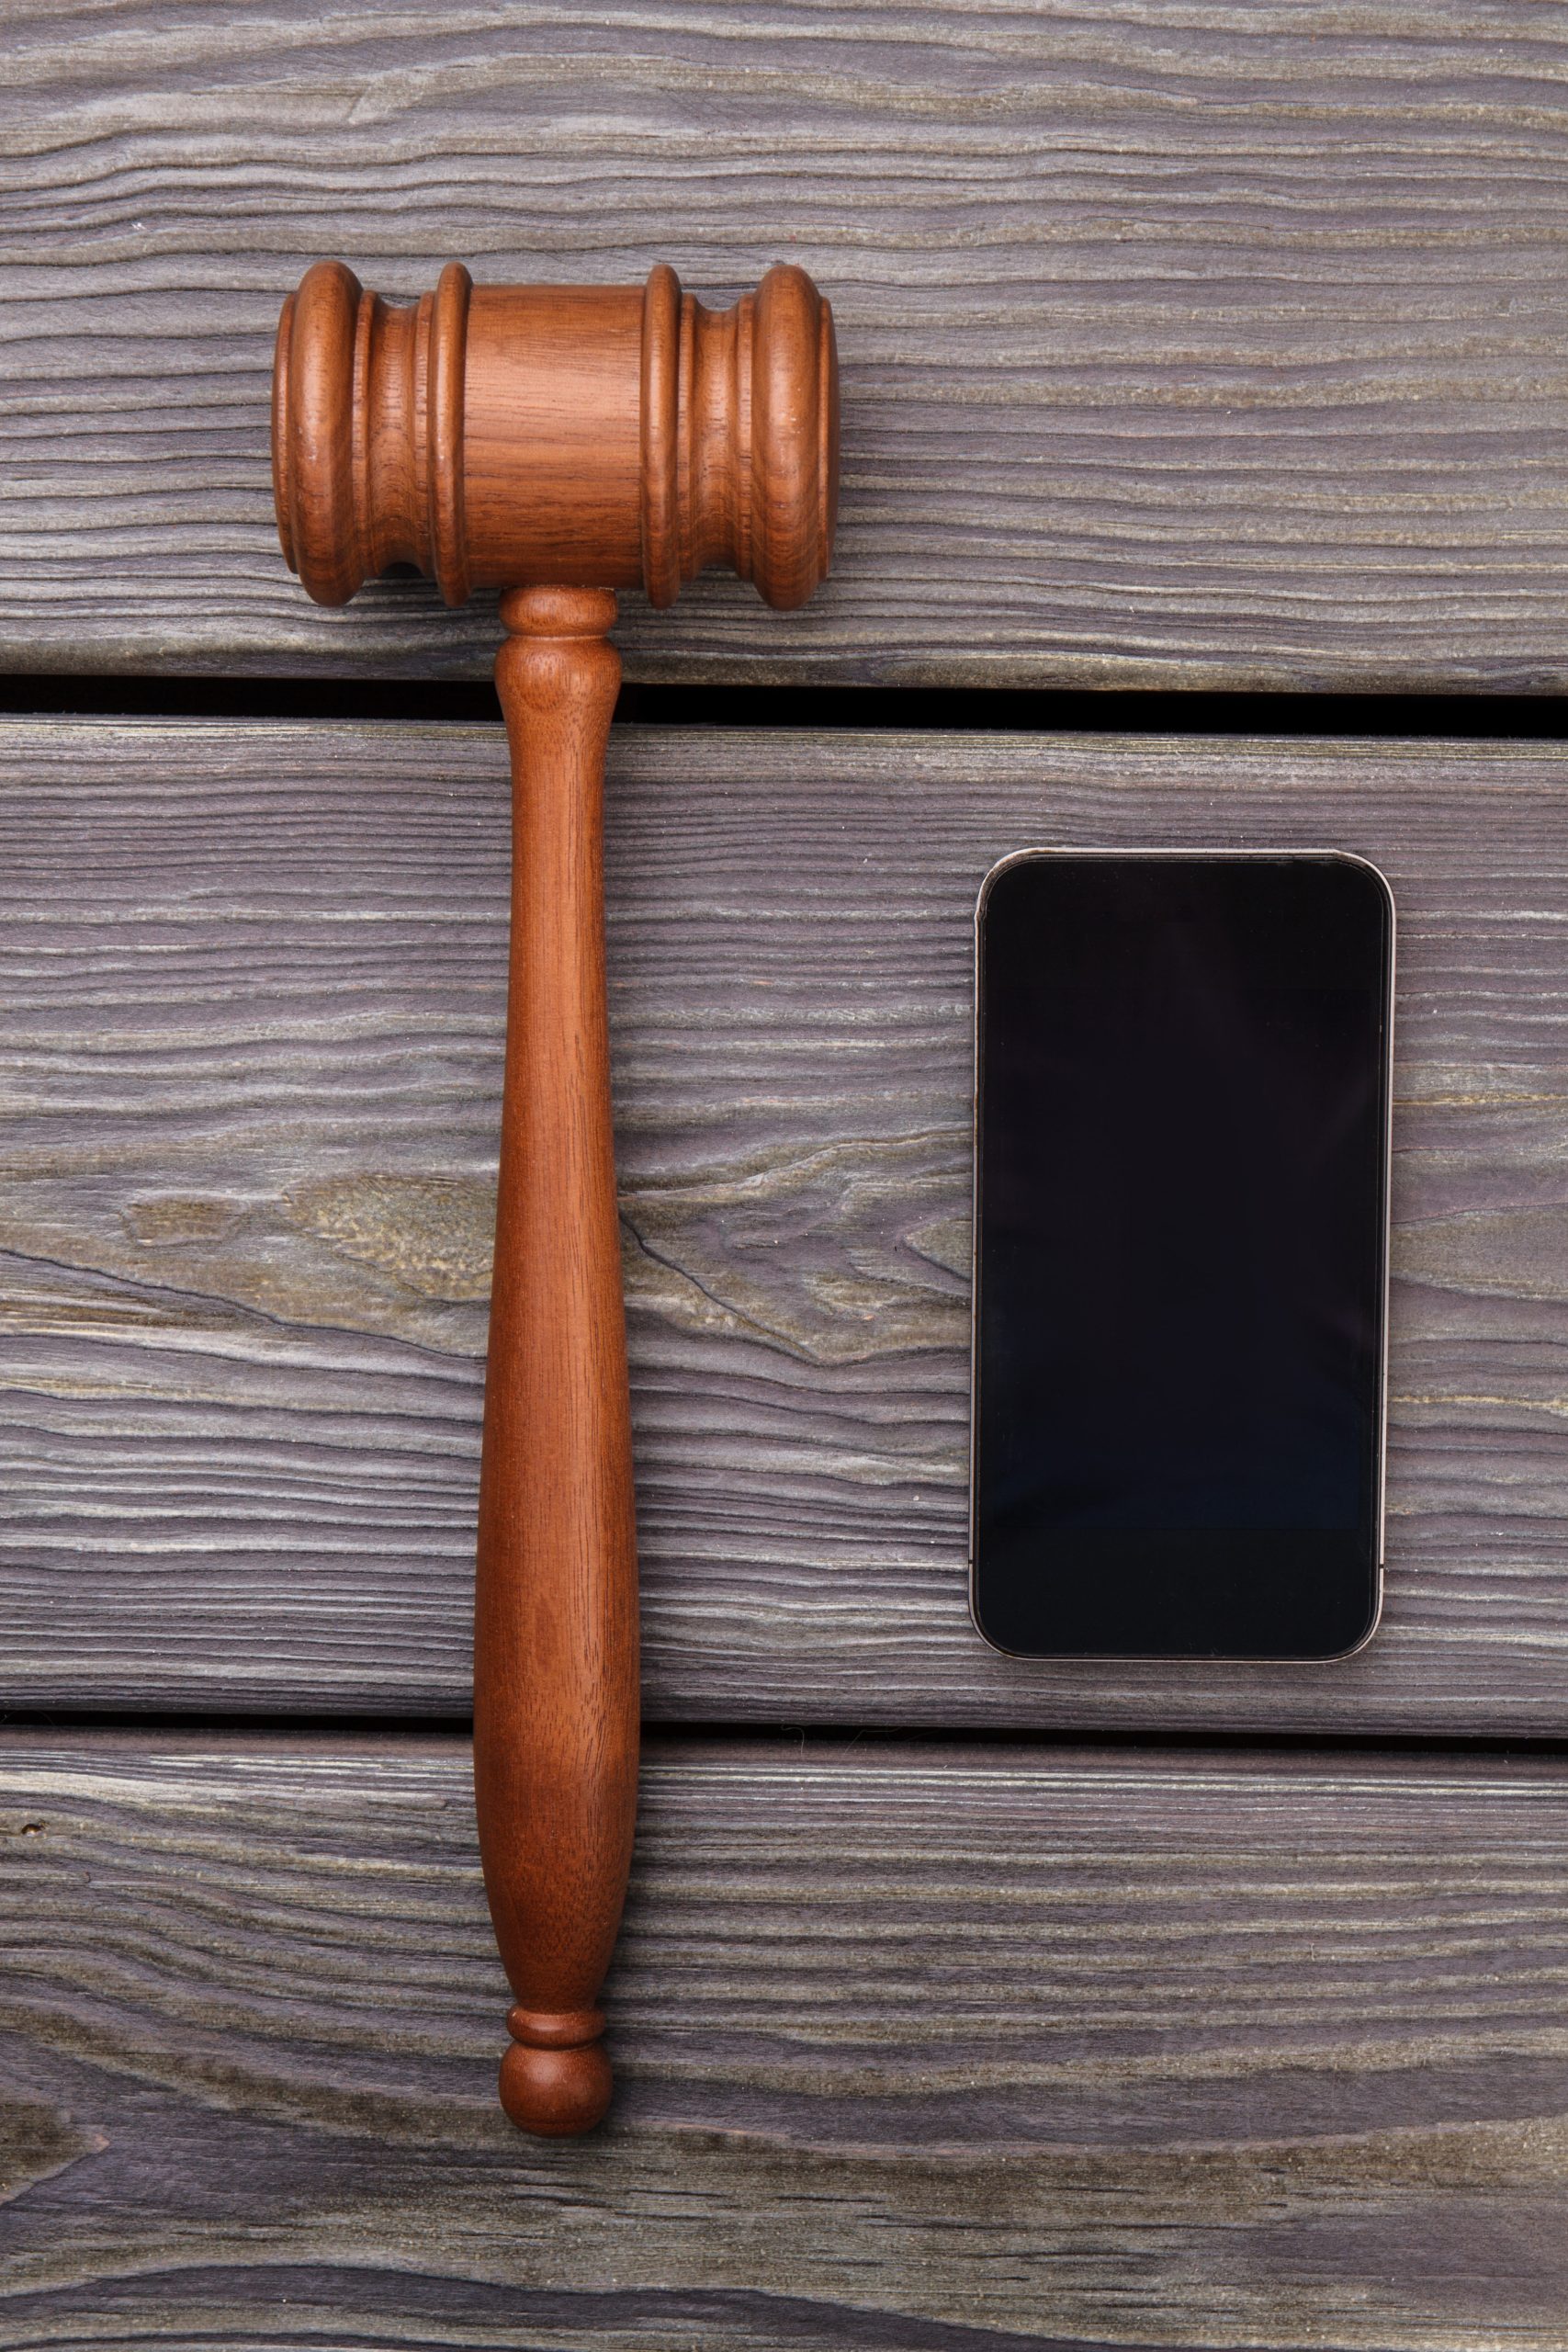 Why do you need a virtual receptionist for your law firm?